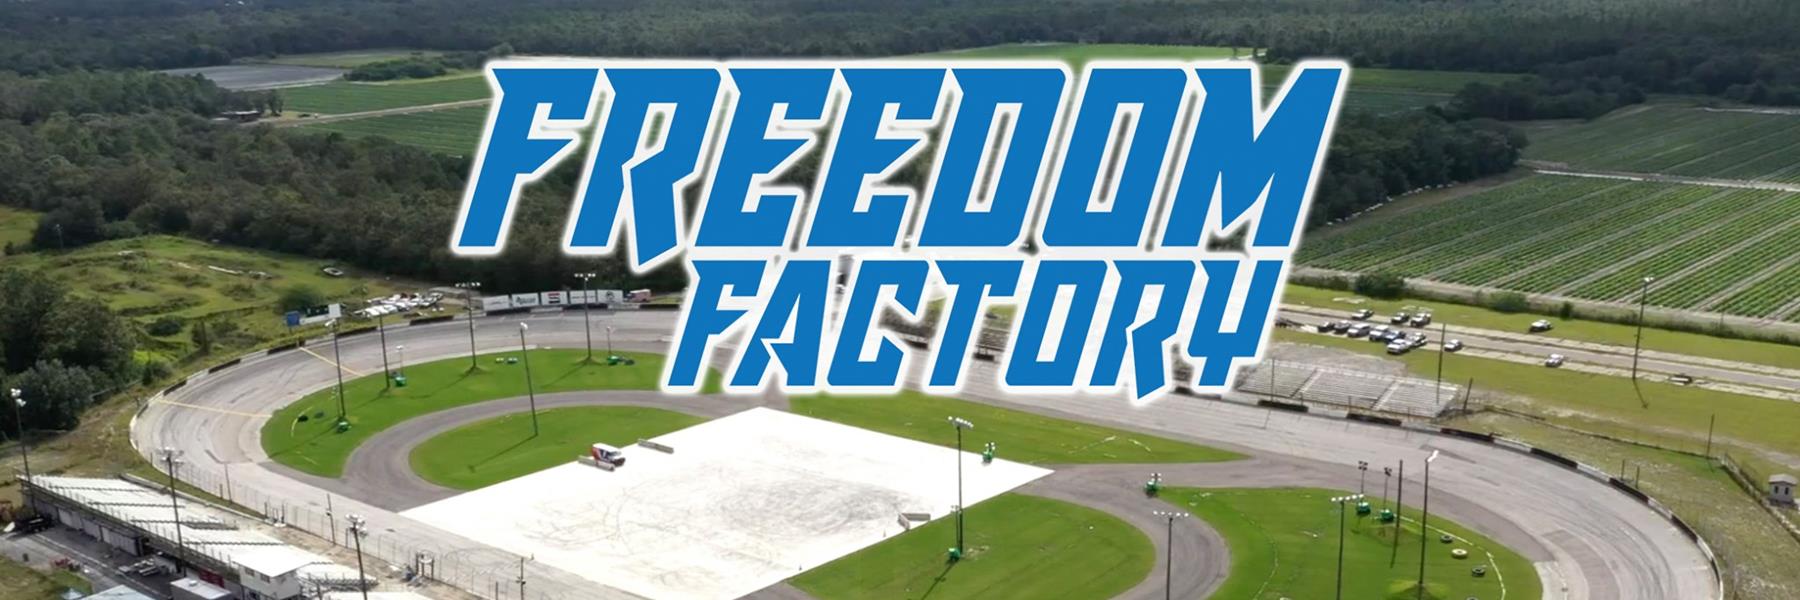 4/1/2016 - Freedom Factory